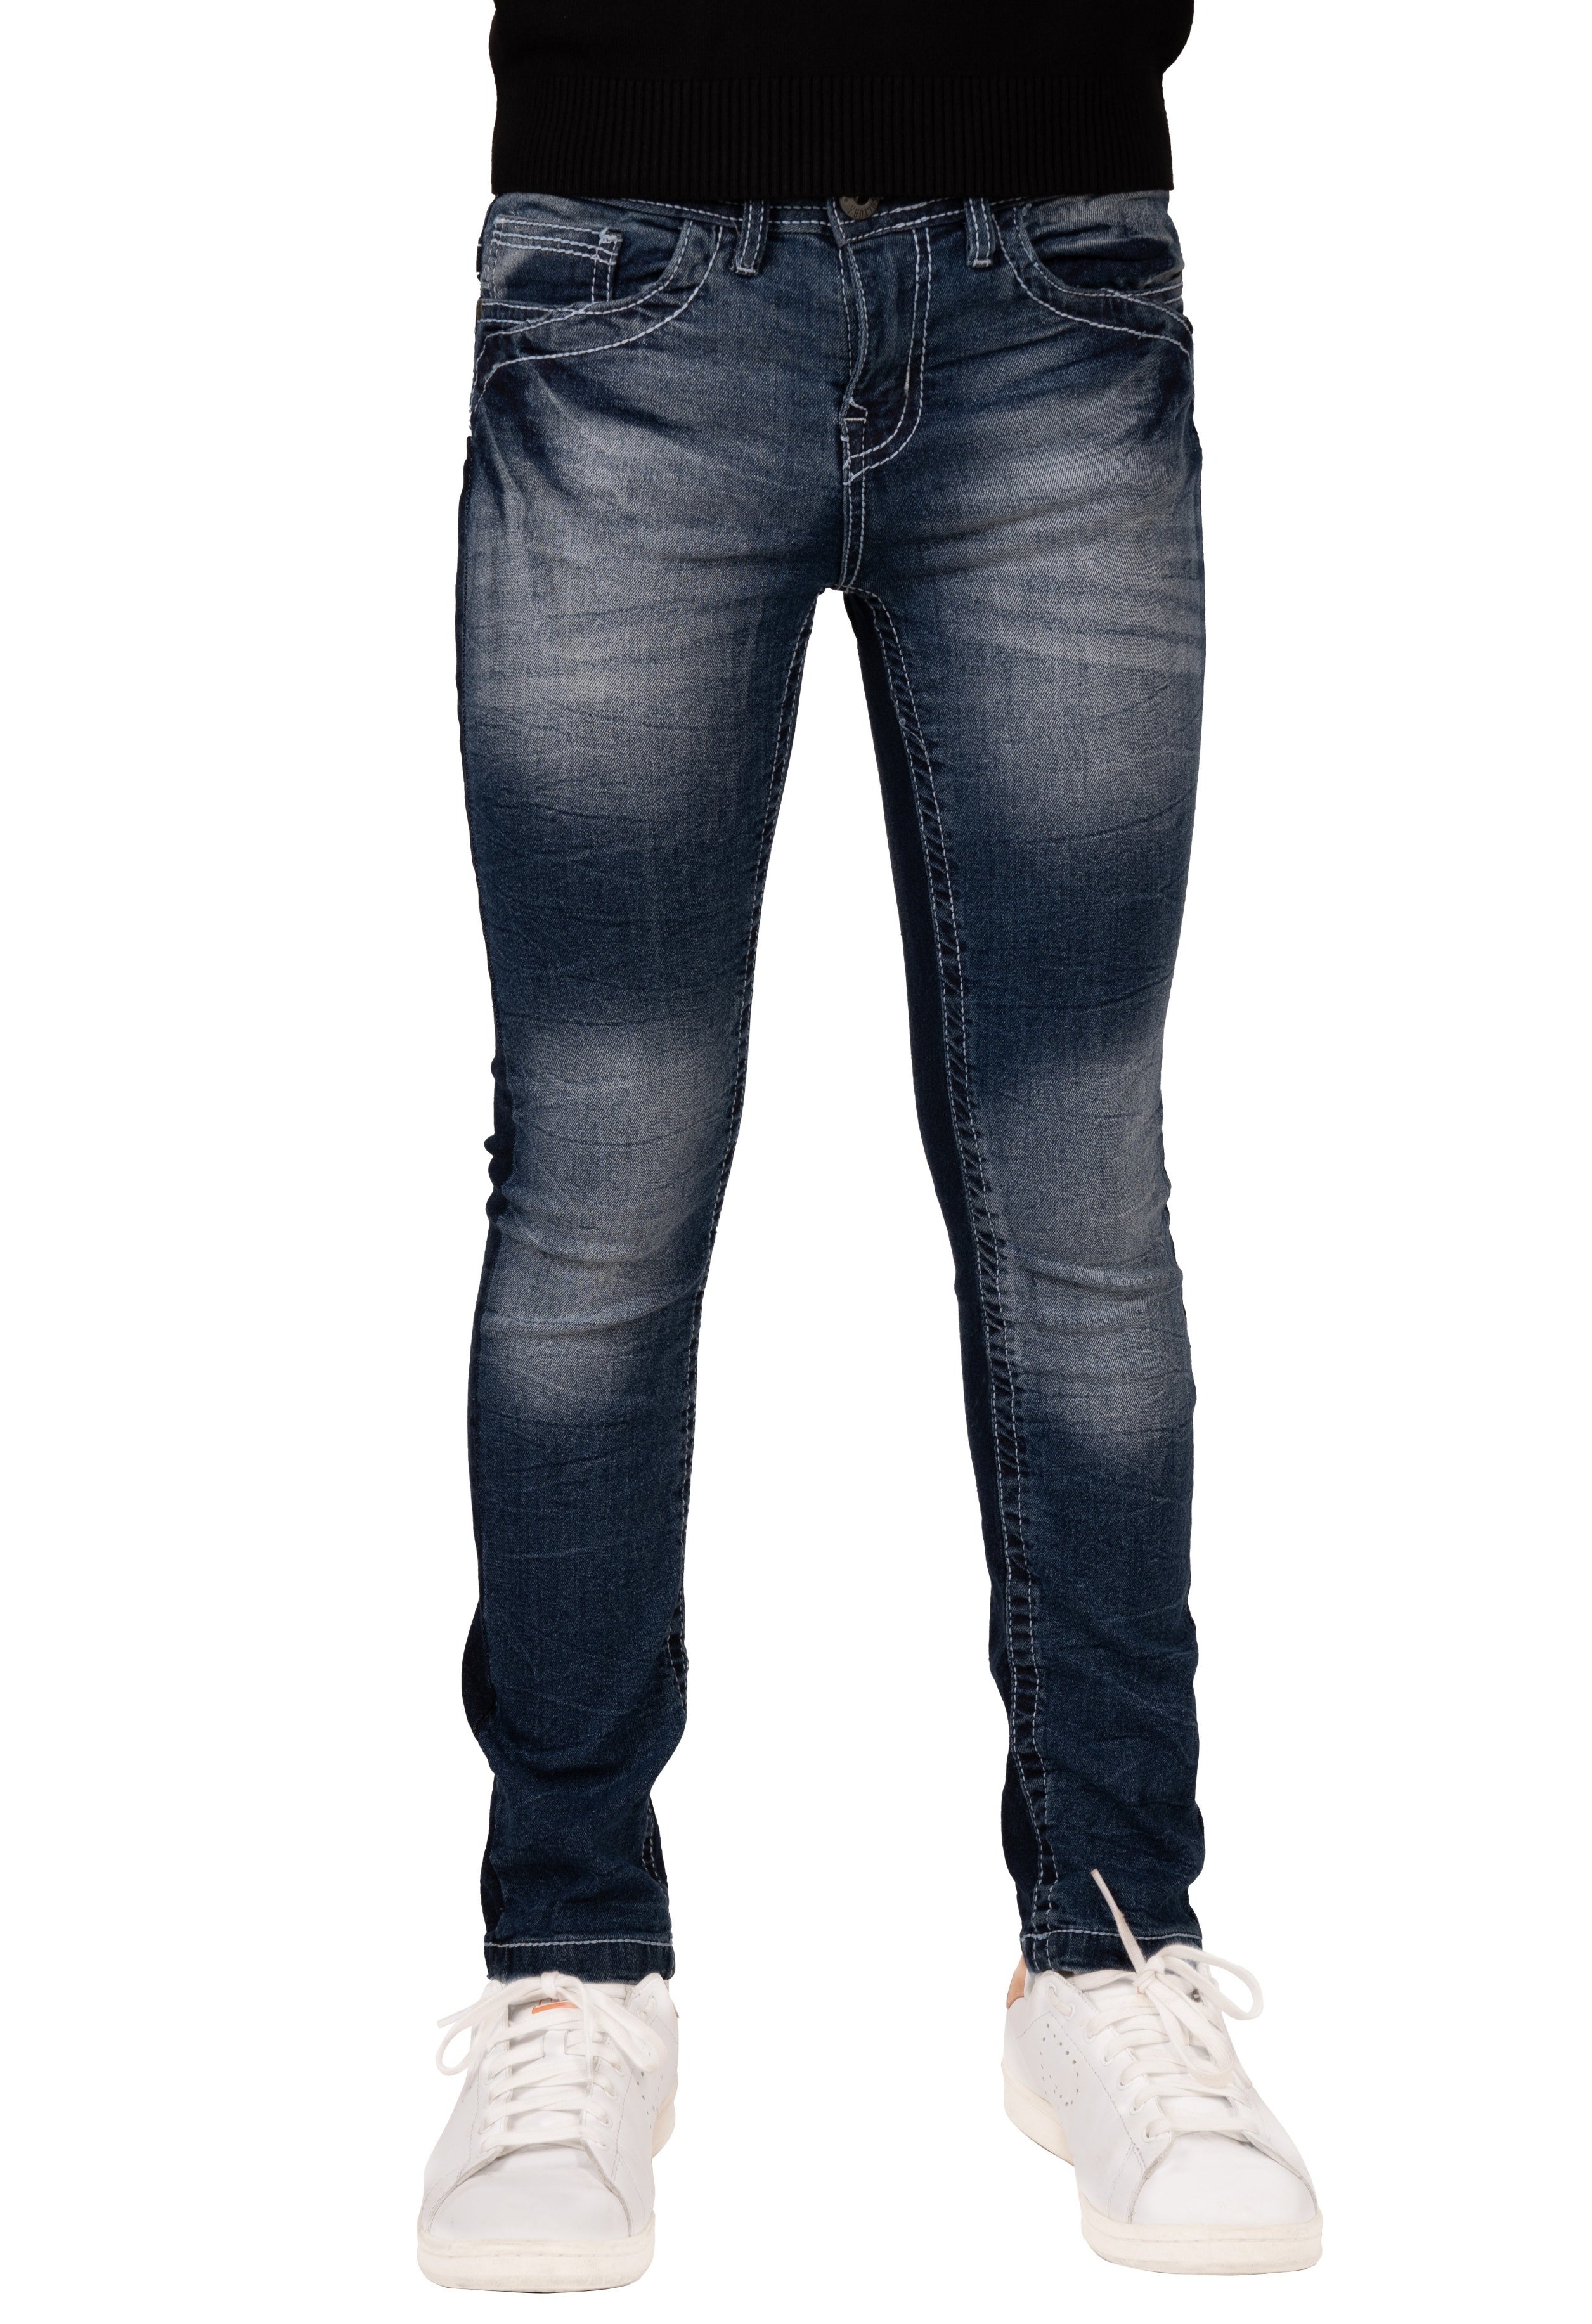 Buy Sataynarayan section Men's Blue and Dark Blue Color Combo Jeans Pants  (Size: 32) at Amazon.in